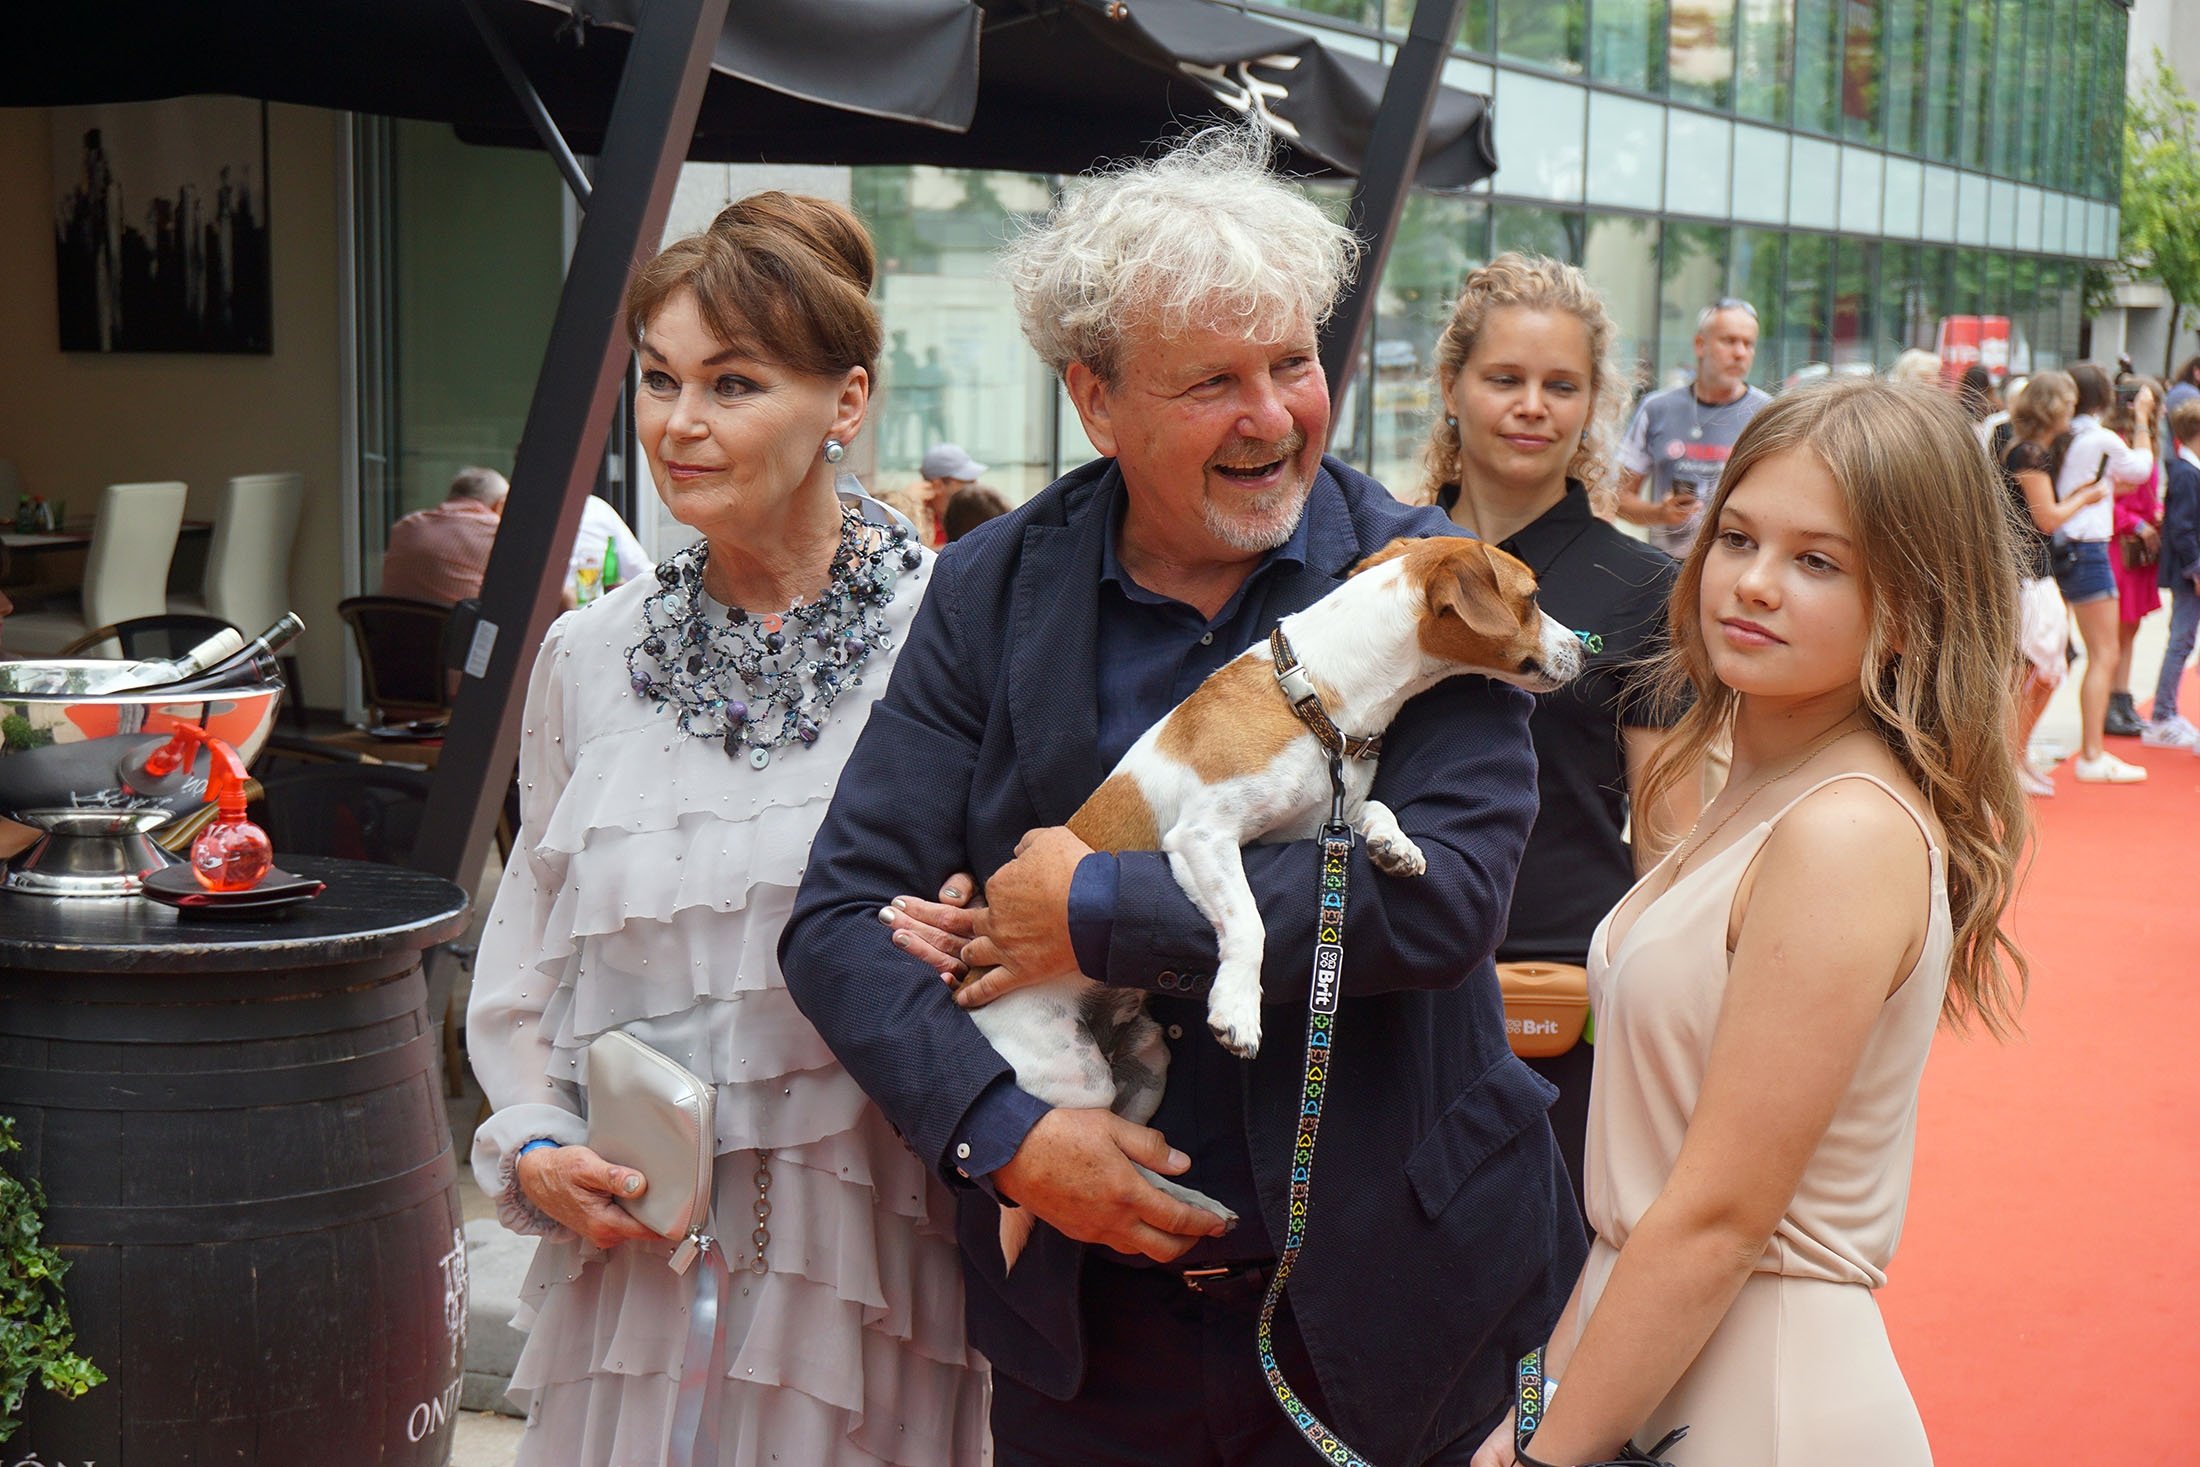 Director and cameraman Filip Brabec poses with his wife, daughter and a dog before the "Gump" premiere in Prague, Czech Republic, July 21, 2021. (Reuters Photo)